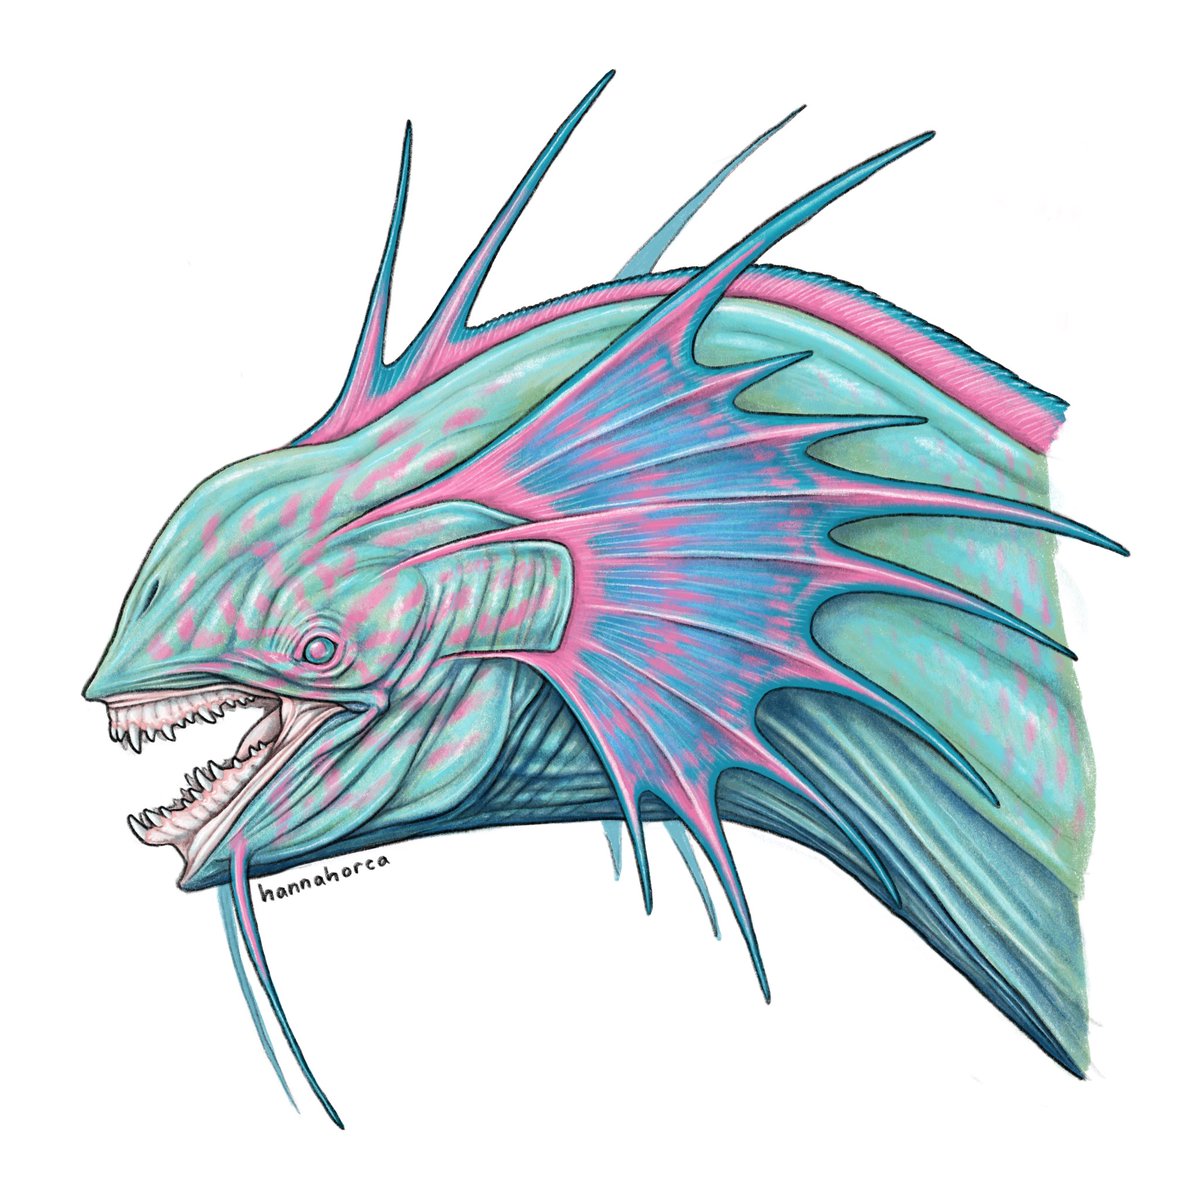 「Another fish monster! This one is inspir」|Hannah Comstockのイラスト